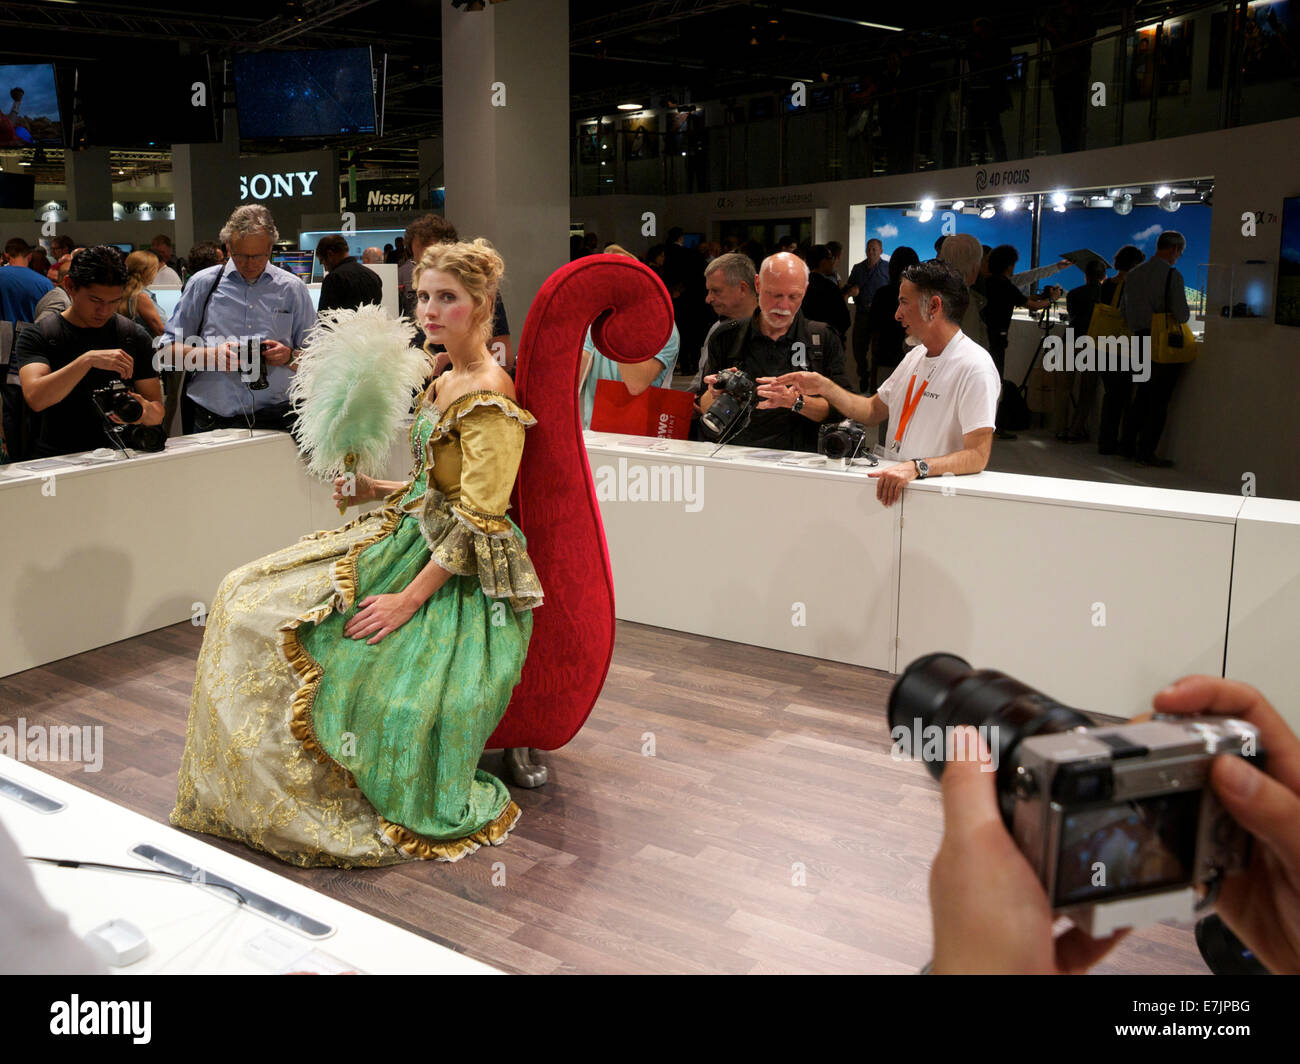 Sony Alpha mirrorless camera system stand at Photokina 2014 in Cologne, Germany Stock Photo